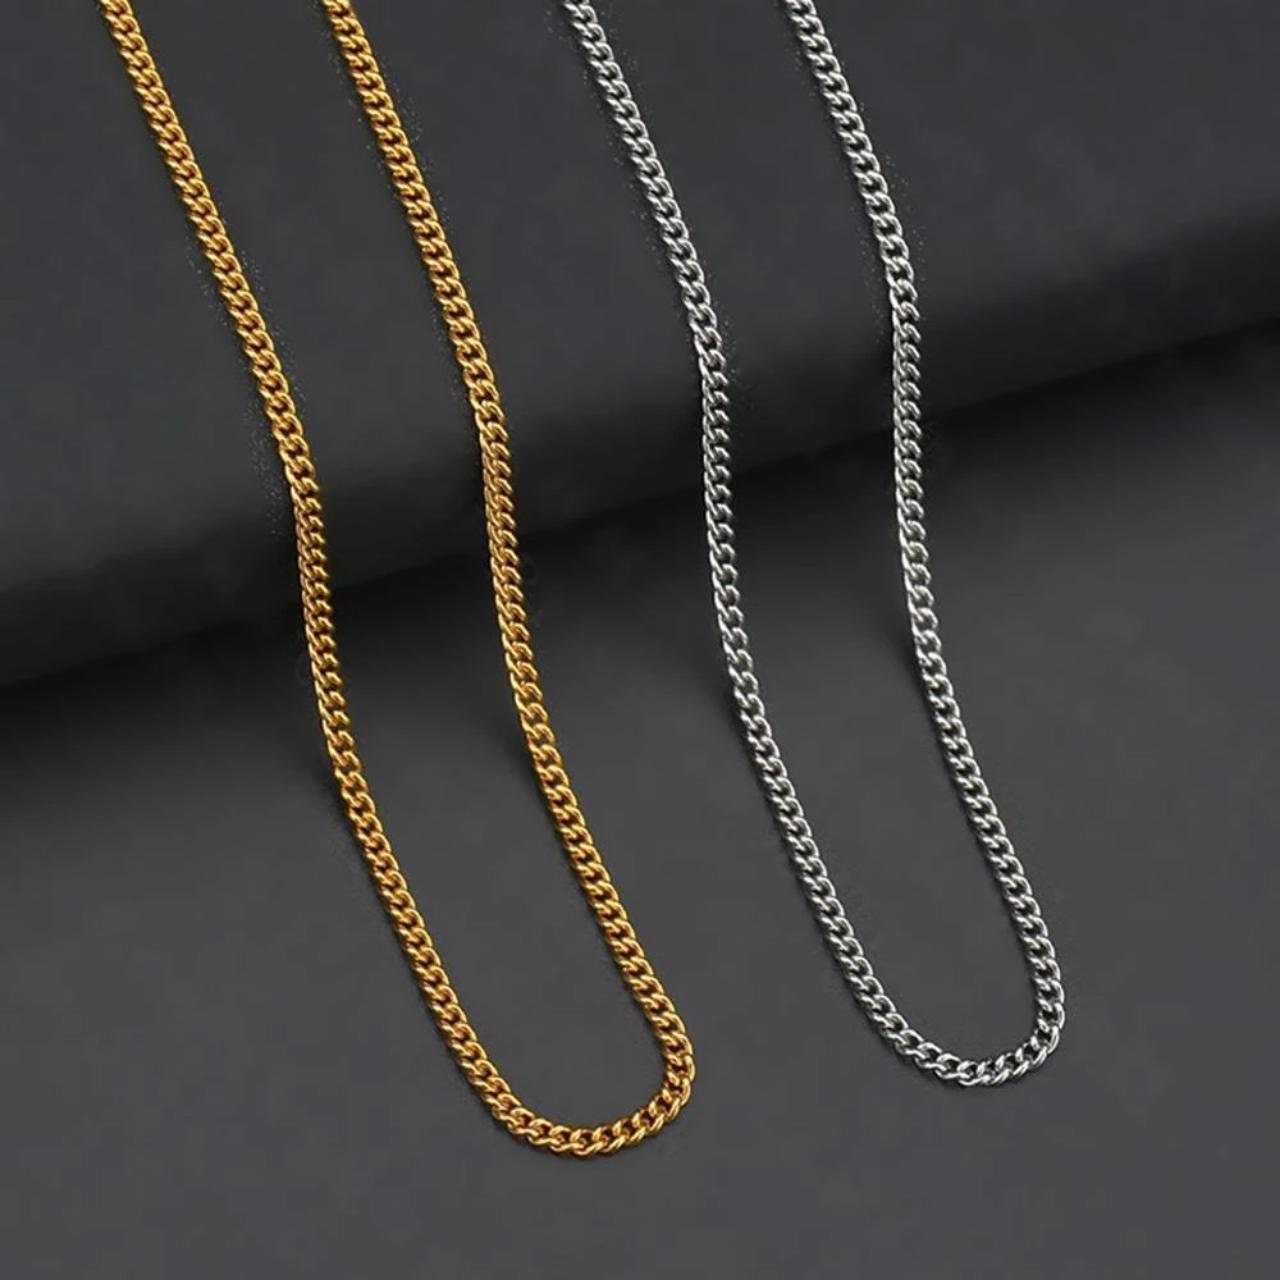 CRW The Great Wave Necklace with 1.8mm curb link chain in gold - Sea Life Necklace for Women - Surf Necklace for Men - Necklace with Pendant